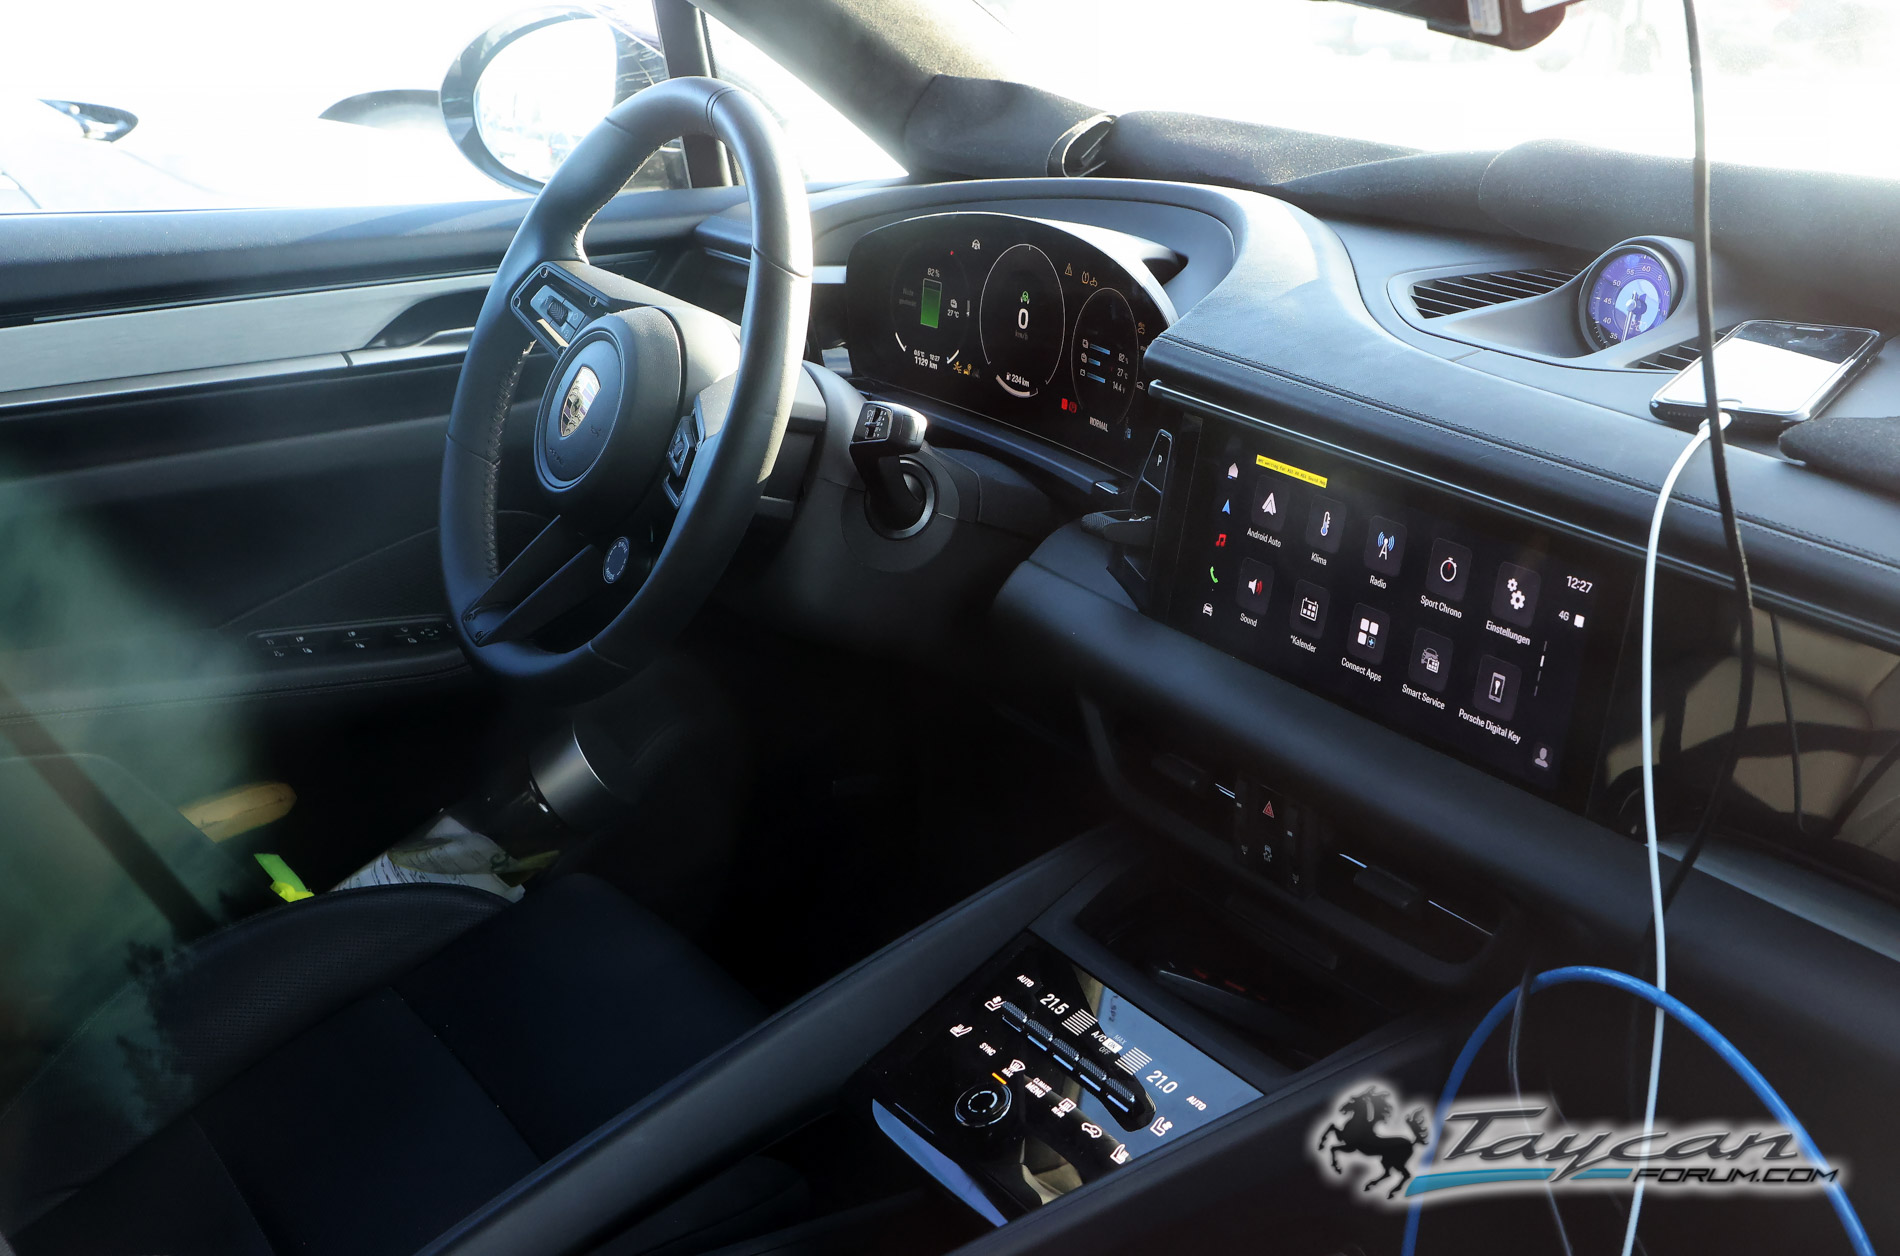 Macan EV Macan EV Interior Spied Uncovered! + Latest Cold Climate Testing Photos Porsche Macan 4